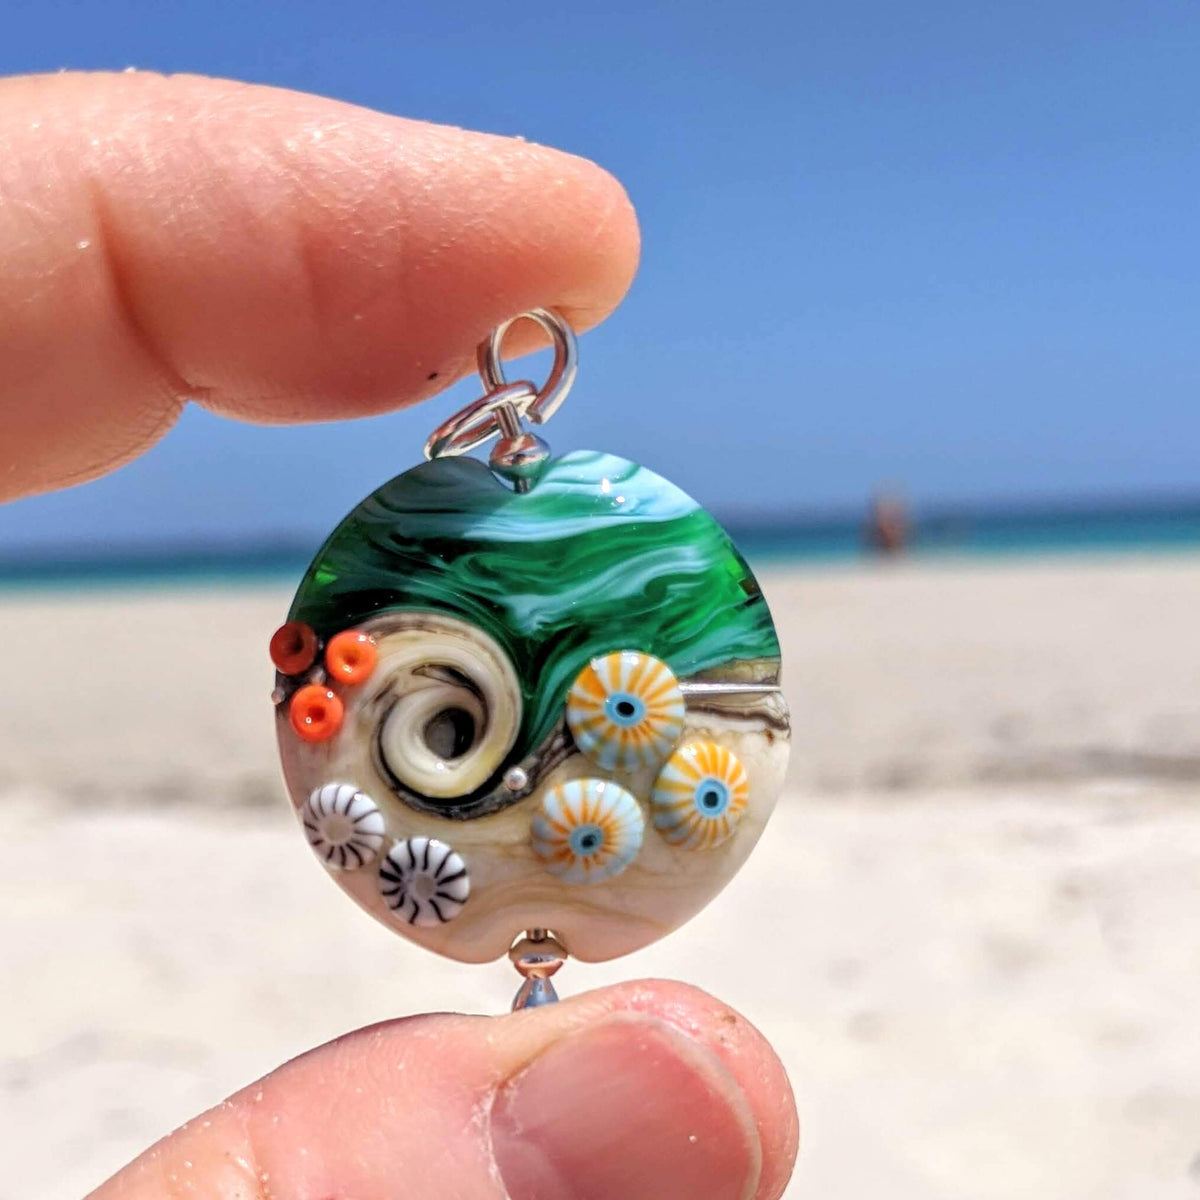 Pendant held up against a blue sky and white sand beach